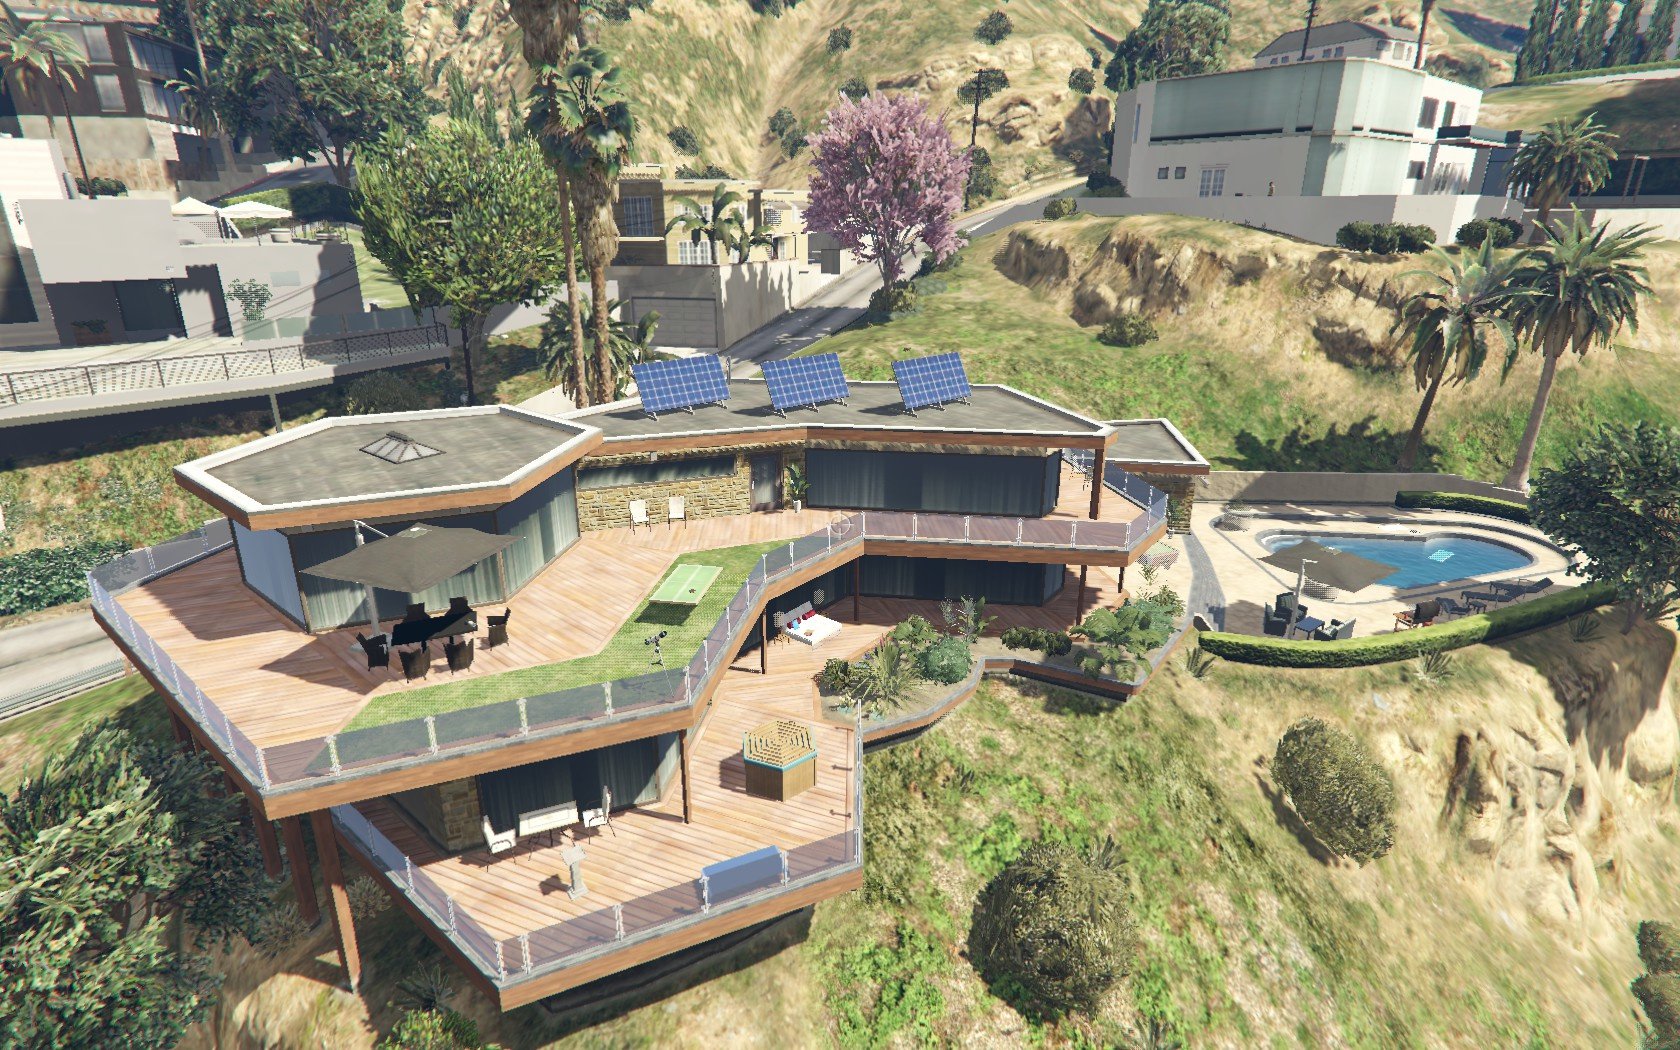 Richest house in gta 5 фото 65